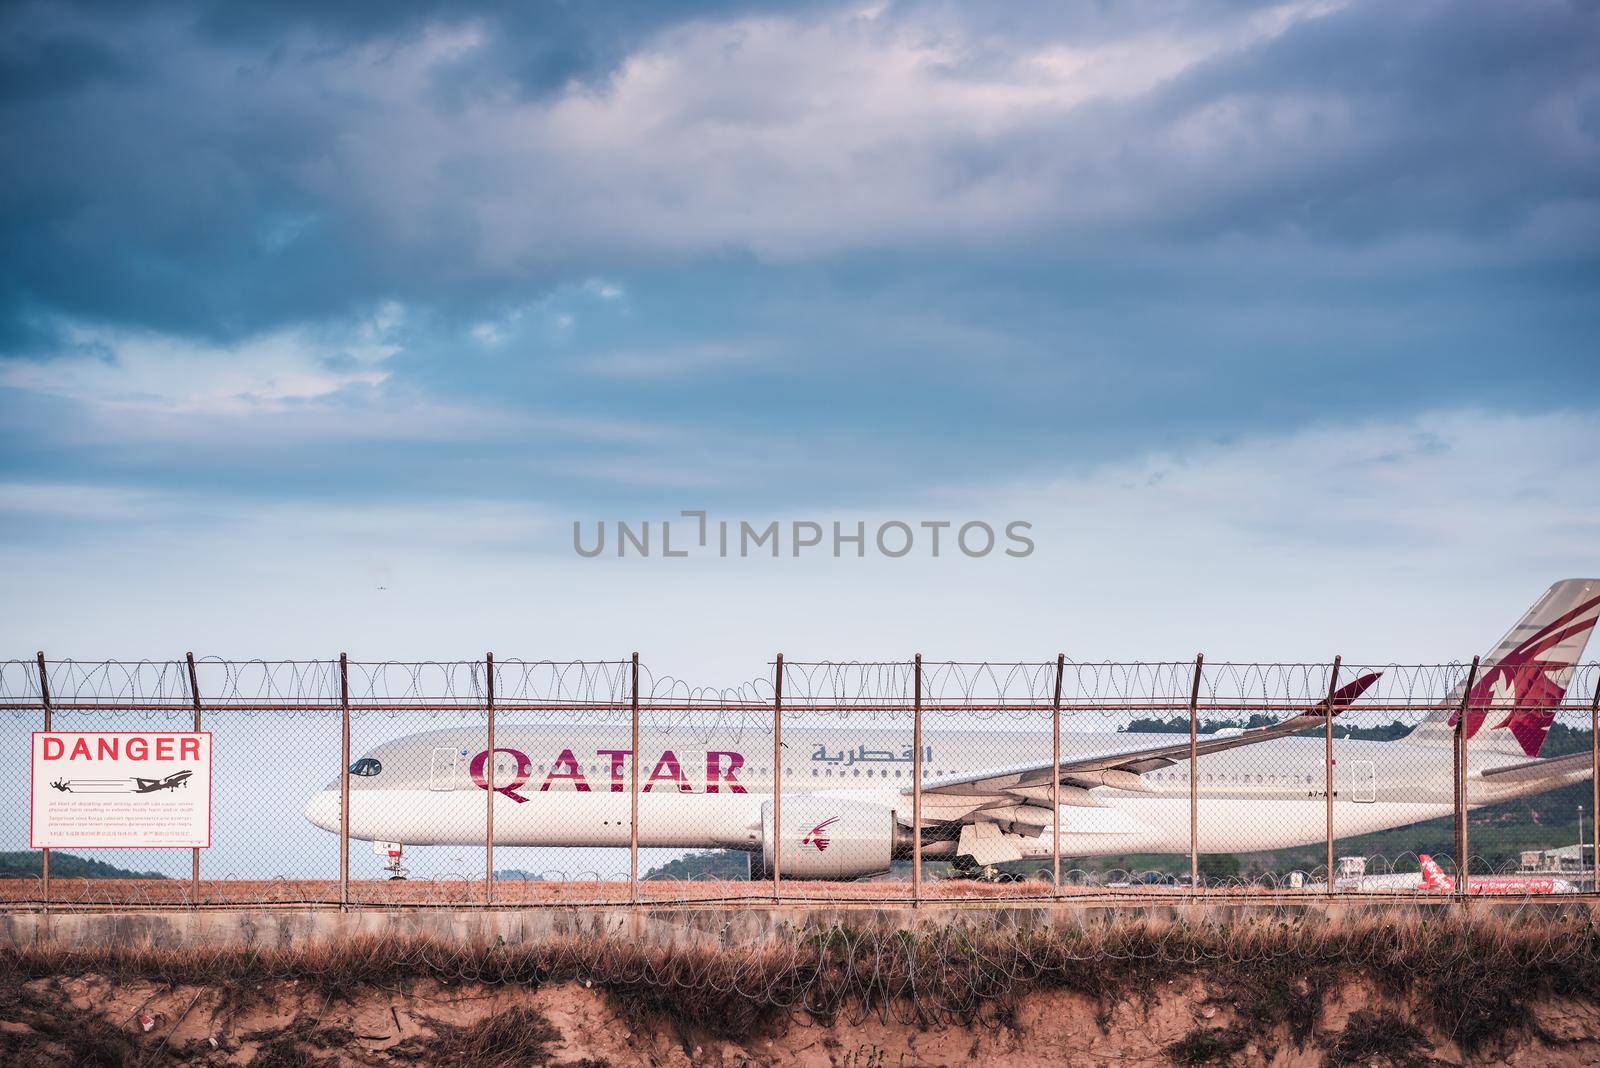 Phuket, Thailand - Feb 20, 2020: Qatar Airways Boeing 777 Airplane on Runway Track Preparation for Take-Off at Phuket International Airport. Business Transportation and Aviation Commercial Airliner by MahaHeang245789